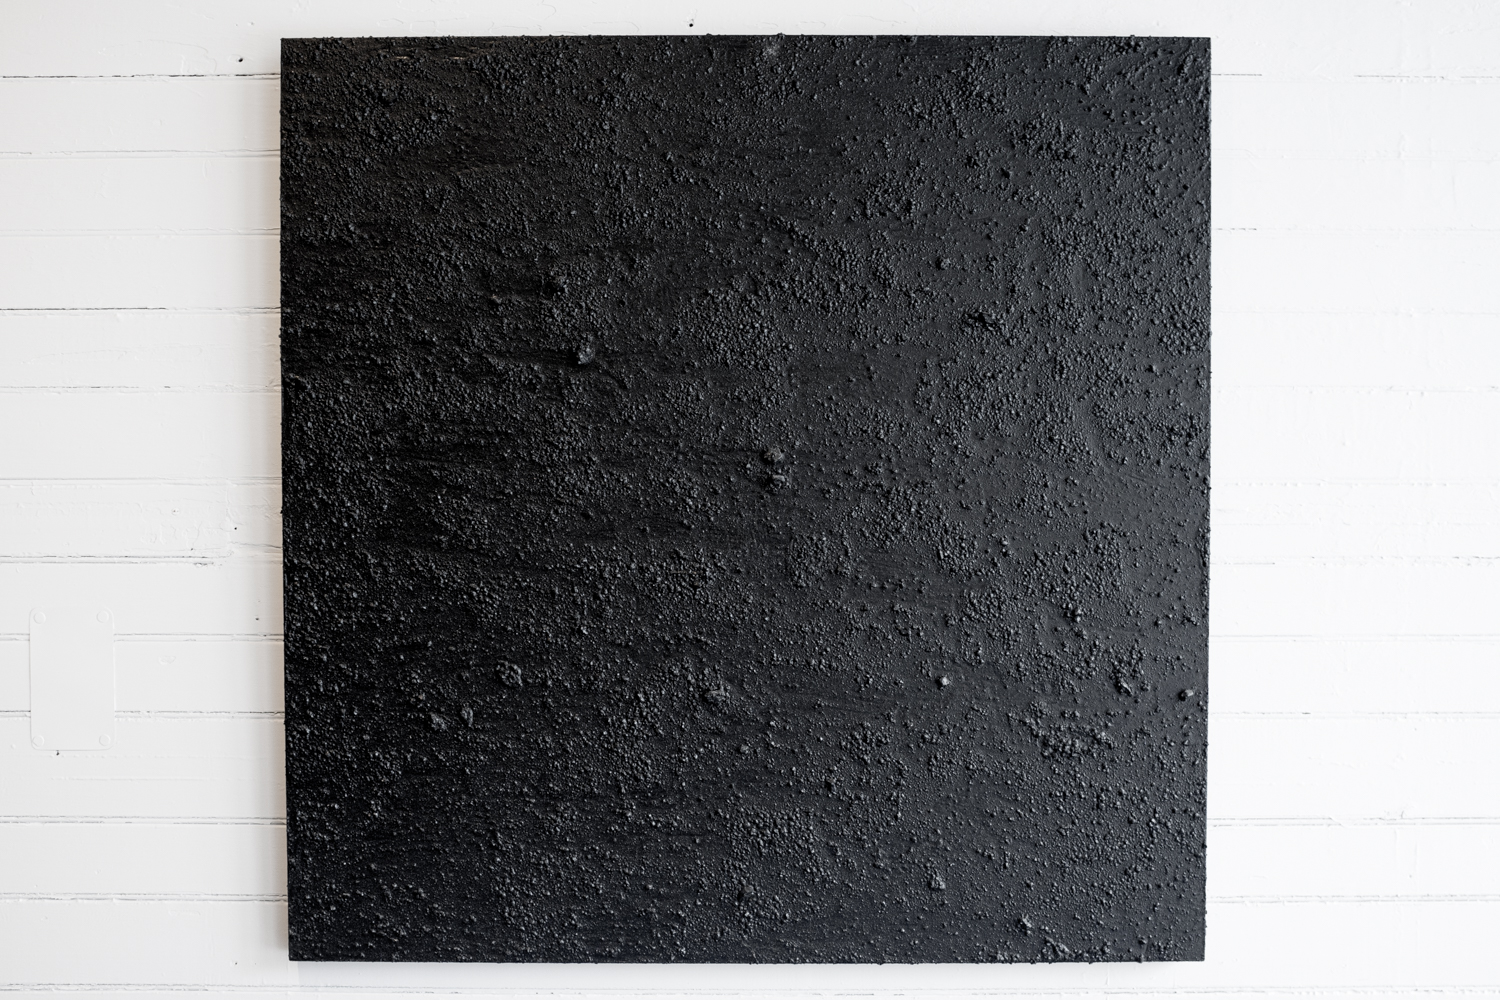 Bakerstown Seam #5, Appalachian Coal on Panel, 2017, 32 x 32 inches